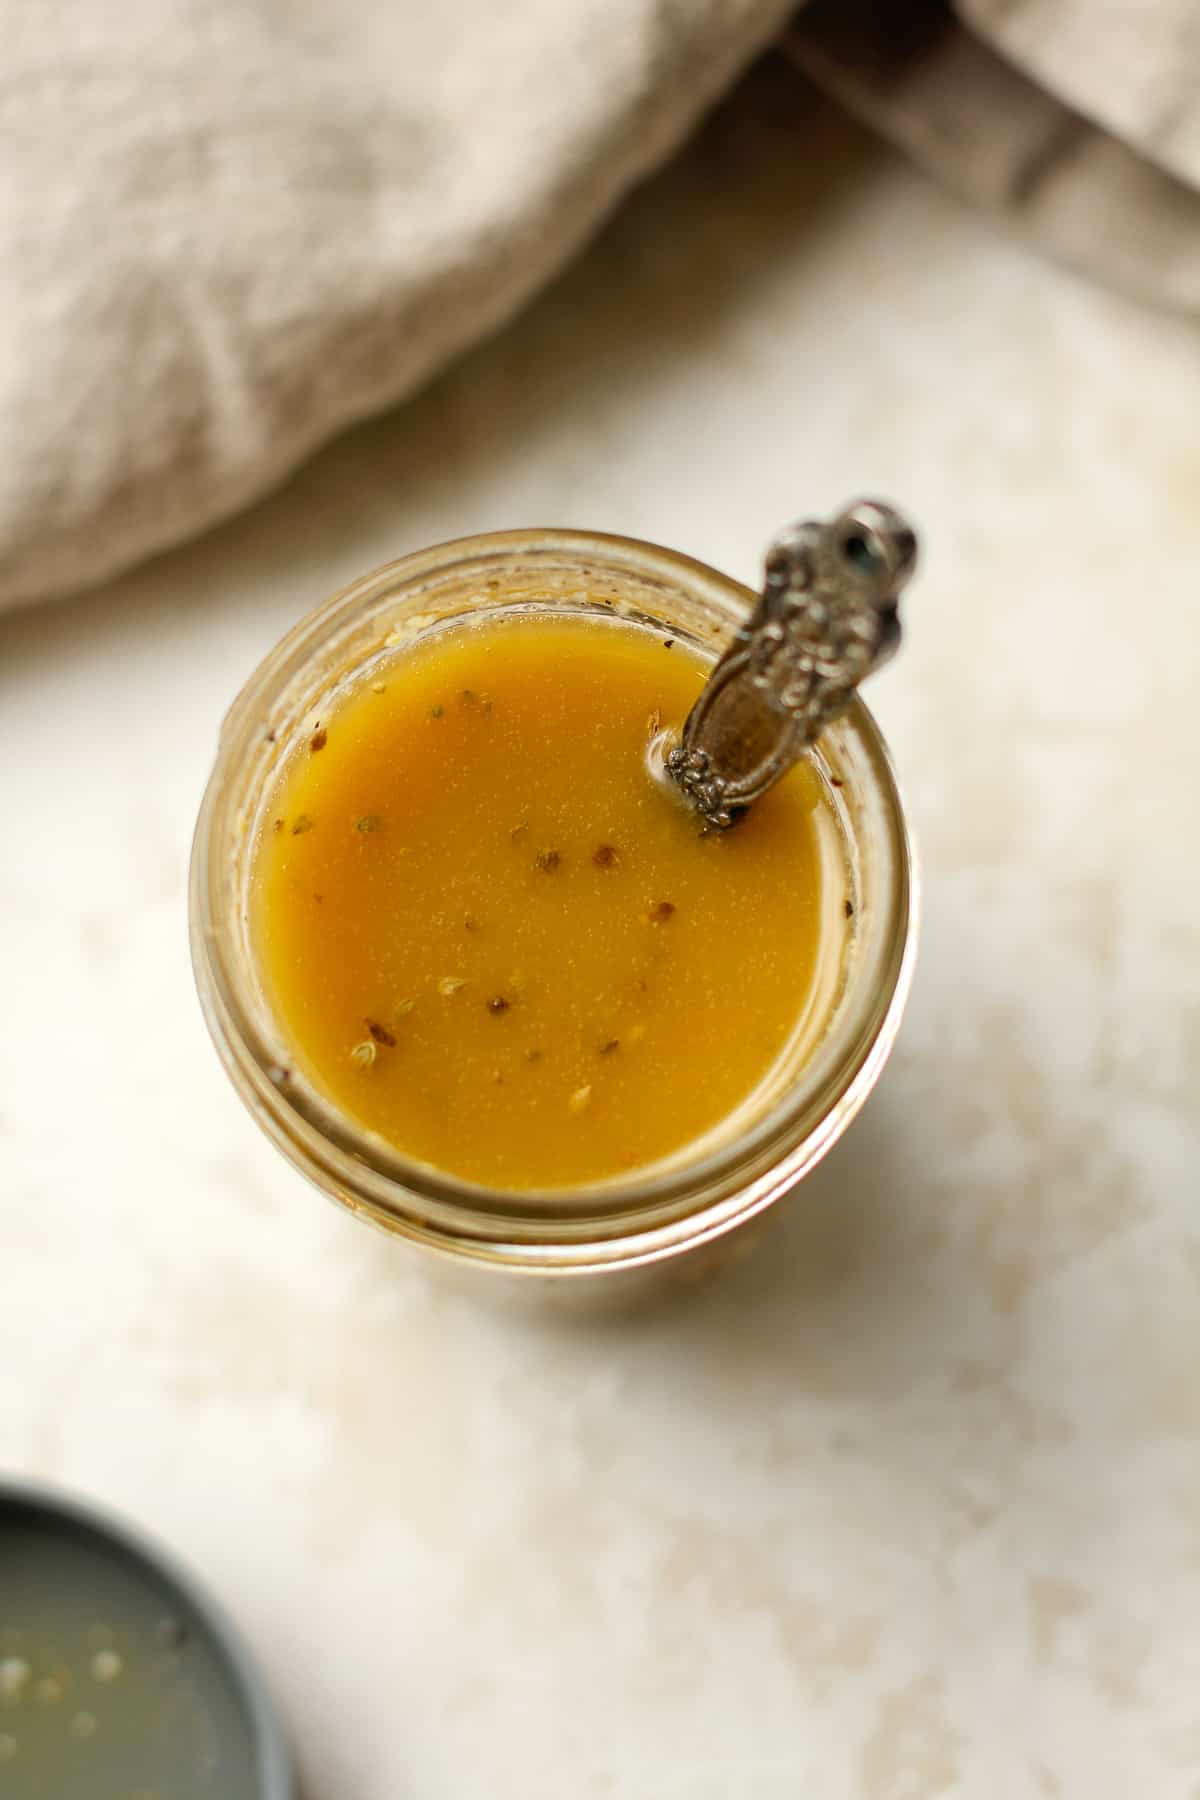 Overhead view of a jar of Italian dressing with a spoon.